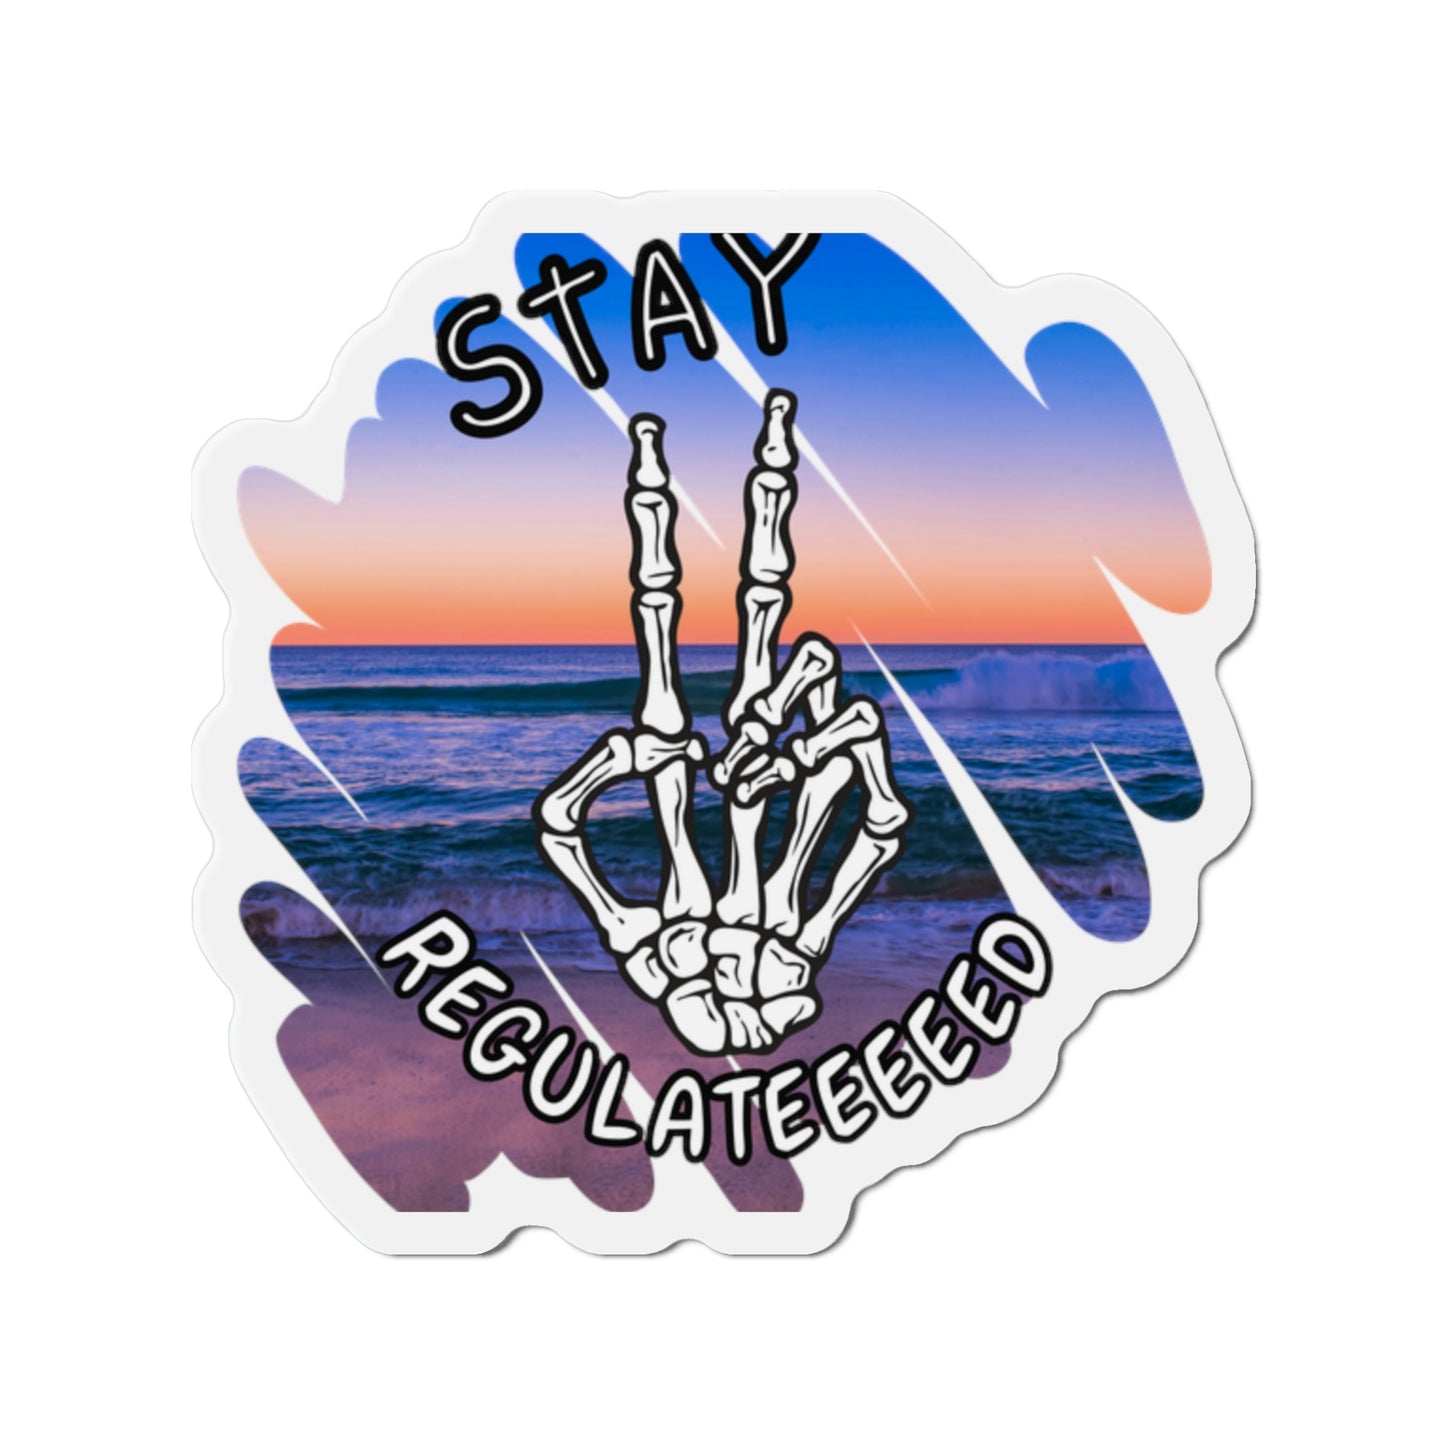 Stay Regulated [Gauthism Line] Die-Cut Magnets